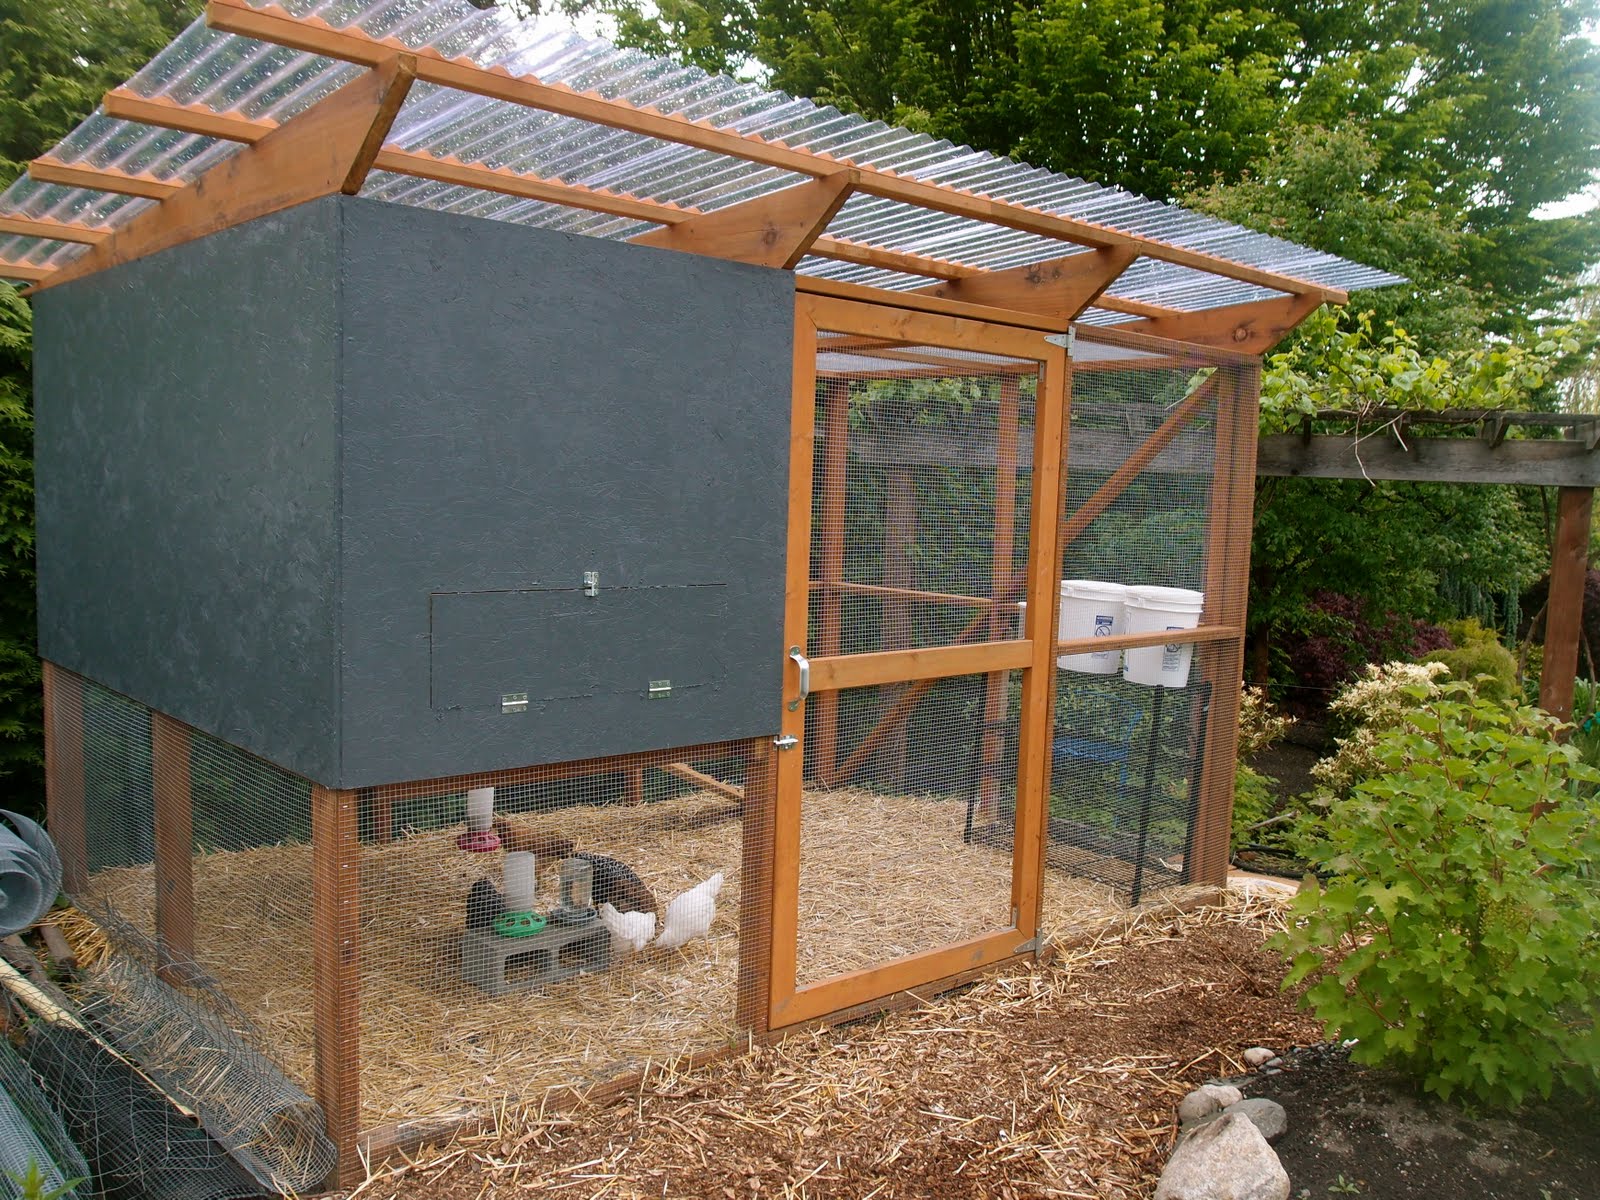 How to build a slanted roof chicken coop Info Coop Channel